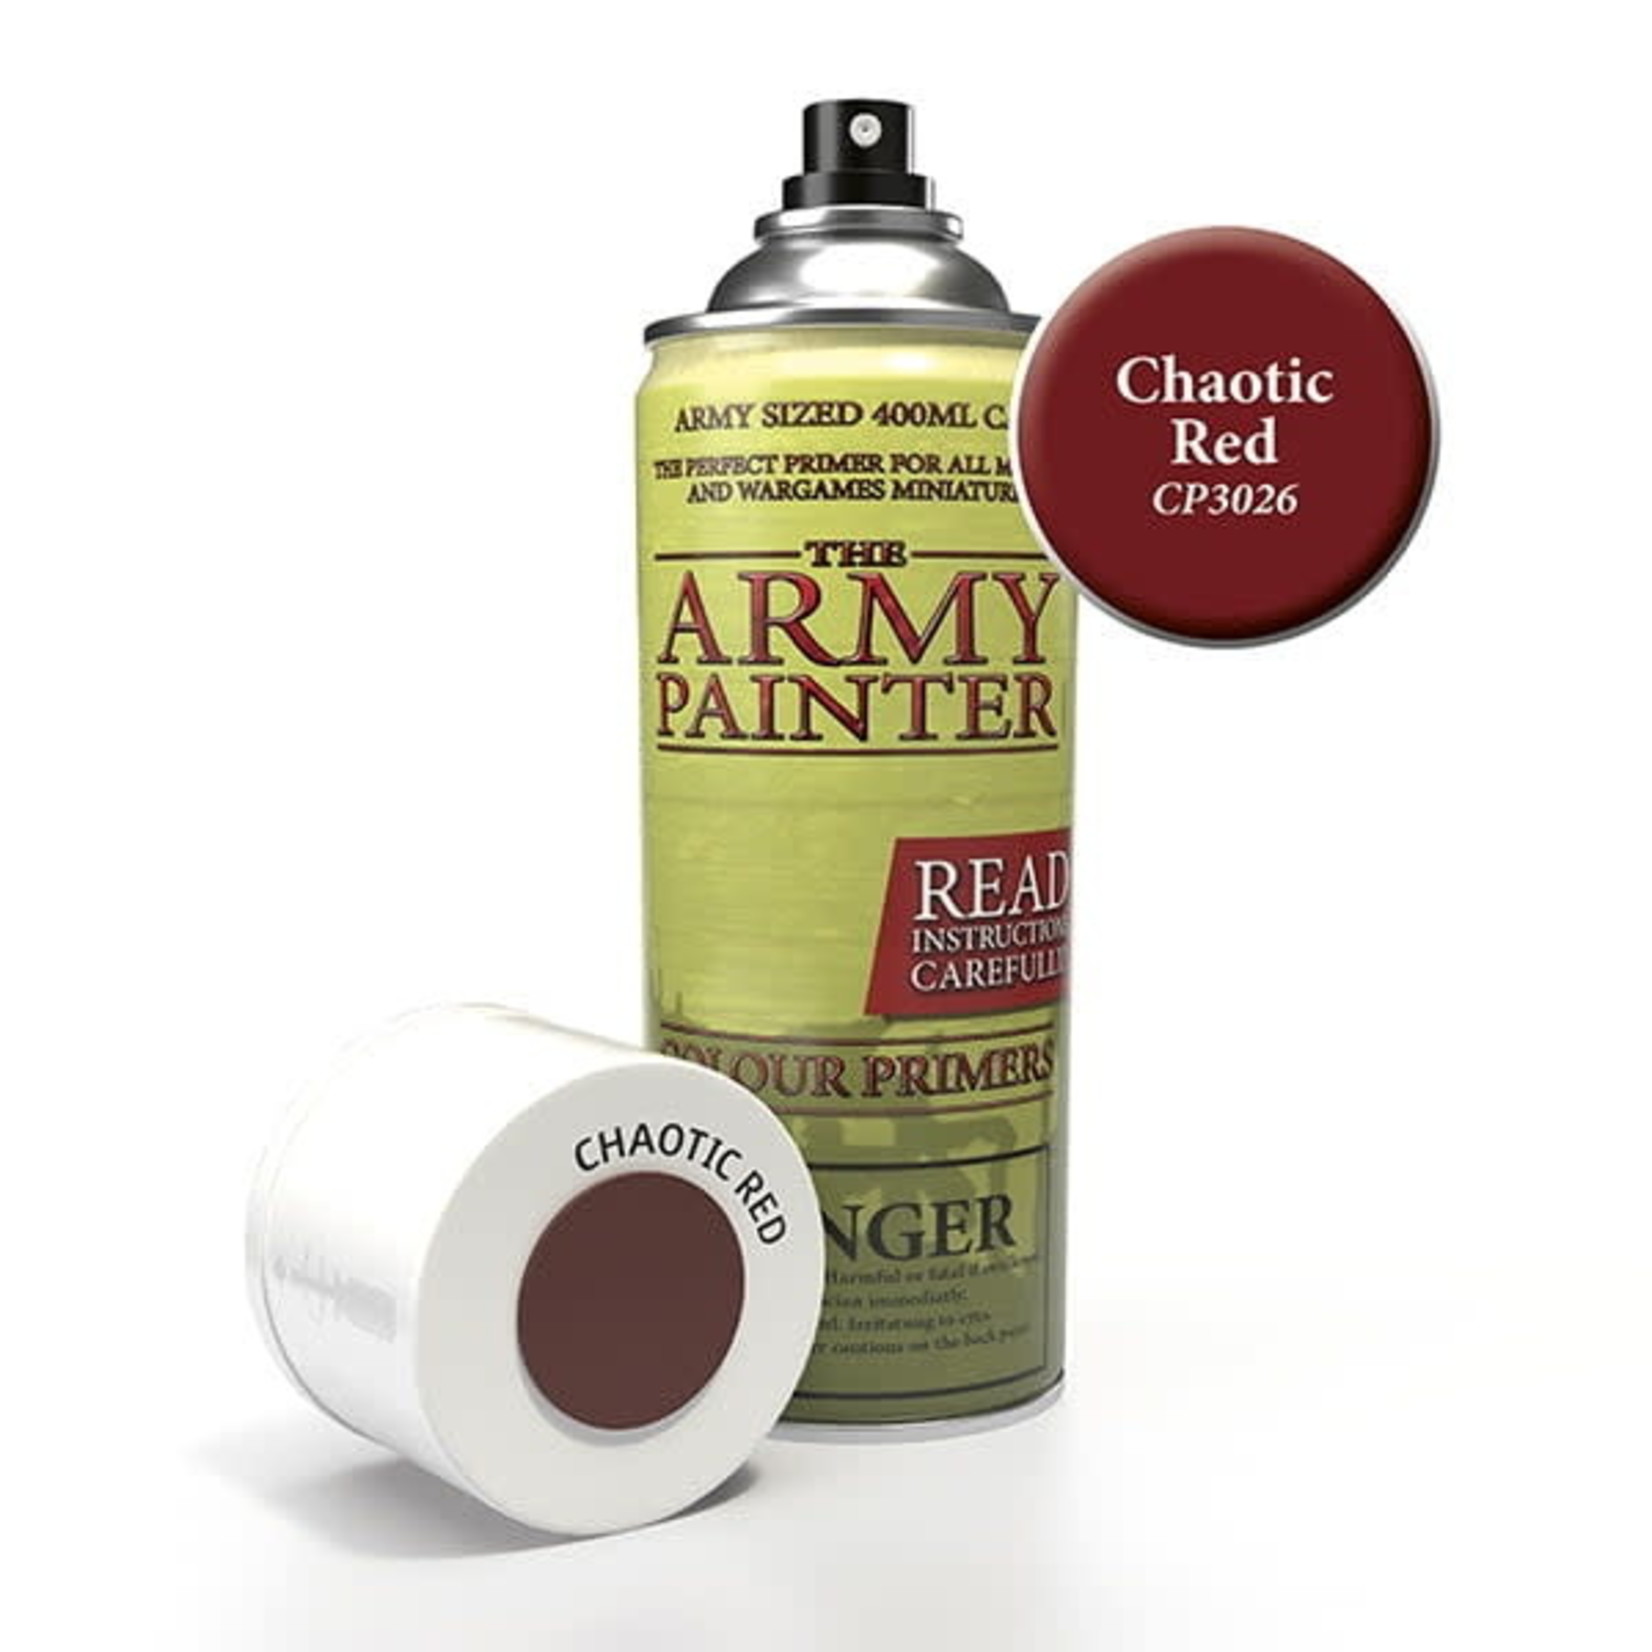 Army Painter AP3026 Colour Primer Chaotic Red Spray (400ml)